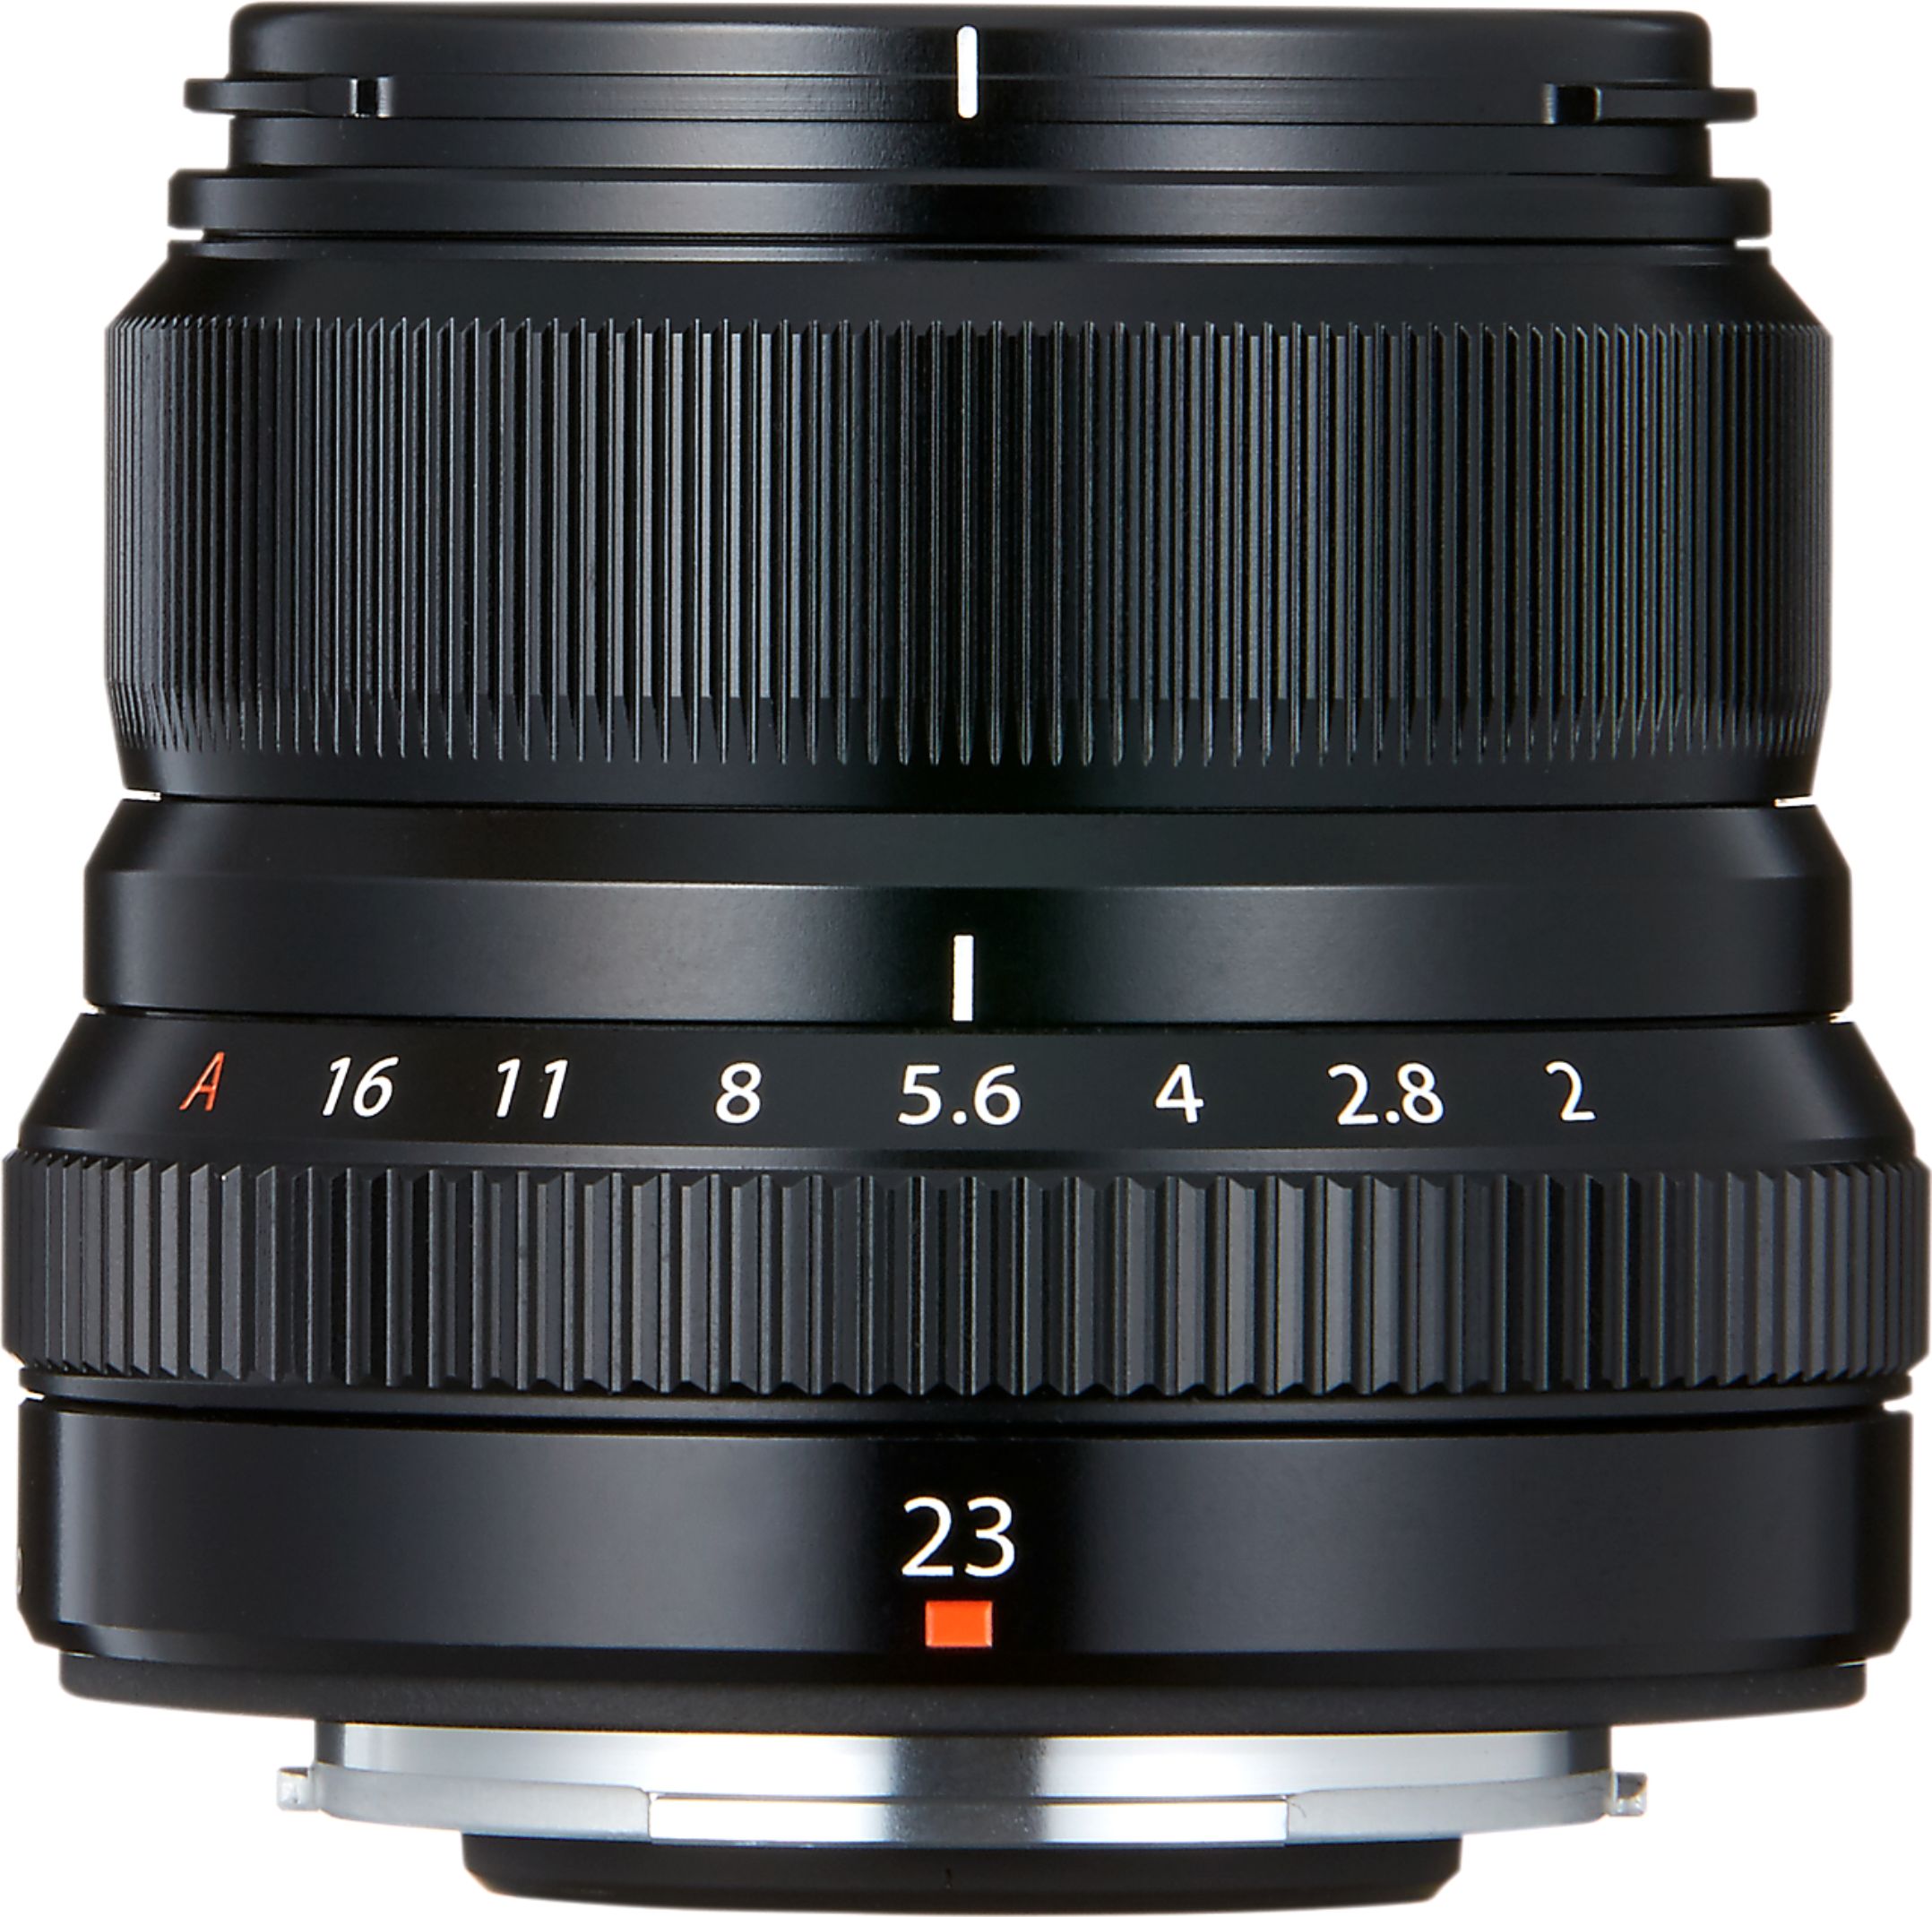 XF23mmF2 R WR Wide-angle Lens for Fujifilm X-Mount System Cameras